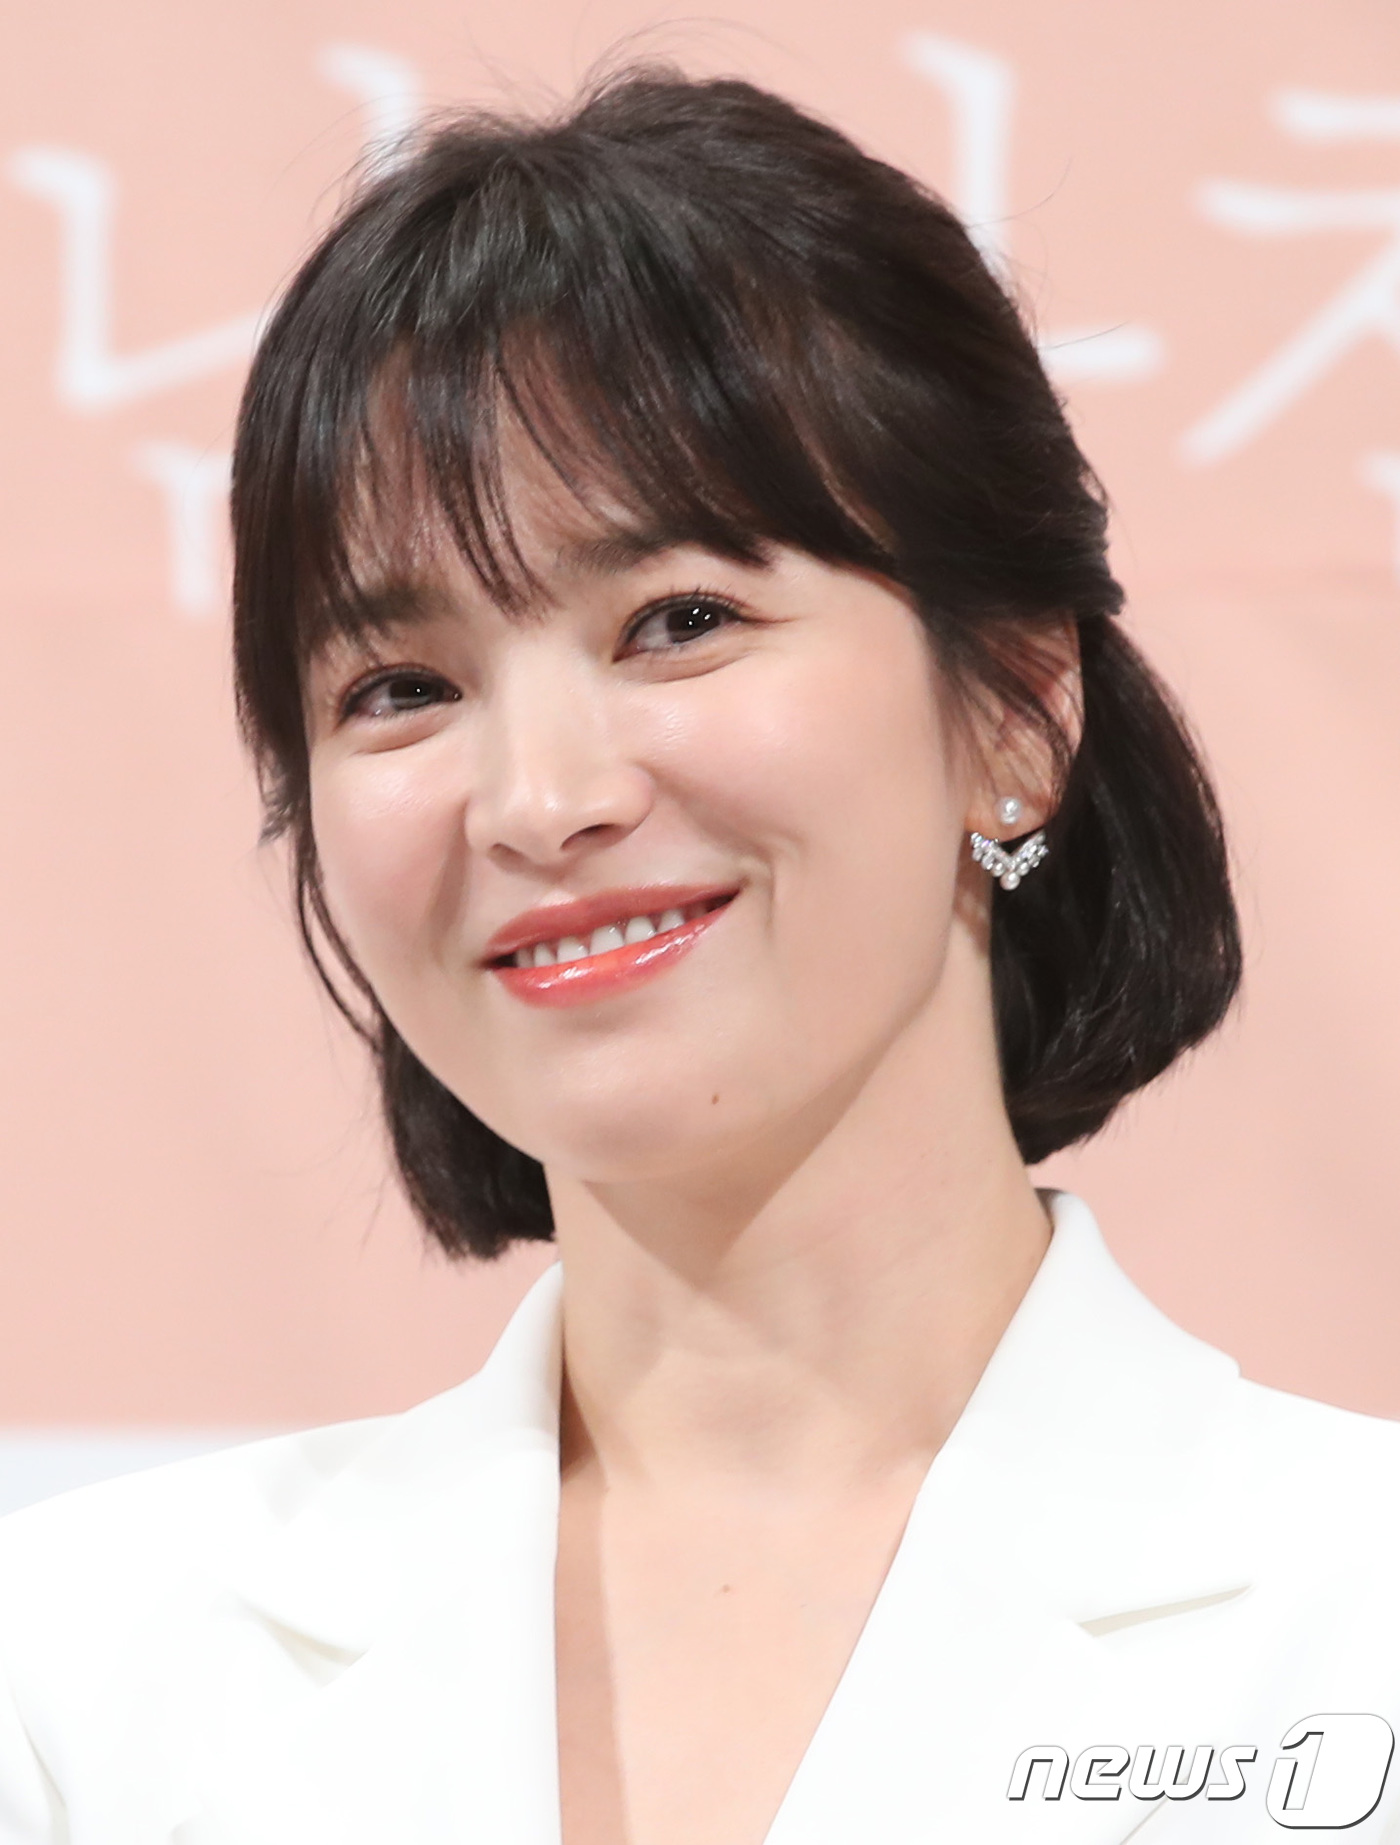 Seoul) = Actor Song Hye-kyo has done meaningful work with SEO Kyoung-Duk Sungshin Womens University professor on the 75th anniversary of the Korean Liberation Army.On the 15th, Professor Seo told his social networking service account that he donated a large sign to the village of Japan Utoro with Actor Song Hye-kyo for the 75th anniversary of the Korean Liberation Army.Professor Seo said, The opportunity to donate the guide plate was that visitors came down to the subway station and felt a little difficulty in finding the town hall of Utoro, and installed it at the entrance of the village. This guide plate has been communicating with the residents of Utoro village for several months, He said.We have been donating Korean guides, Korean signs, and Korean independence movement relief works to 23 sites of the Korean independence movement along with Song Hye-kyo every national anniversary for the past nine years. The collaboration of YG Entertainment SEO Kyoung-Duk - sponsored Song Hye-kyo will continue ...I would like to ask for your attention and support. The following is a special article by Professor SEO Kyoung-Duk.Today, on the 75th anniversary of the Korean Liberation Army, we donated a large signboard to the village of Japan Utoro with Mr. Actor Song Hye-kyo.This sign is 2 meters wide and 1.5 meters long, and is also produced in Korean, Japanese and English.Especially, the feature of this guide plate is that they have been communicating with the residents of Utoro village for a few months and made it with the phrases and designs they want.In addition, the opportunity to donate the signboard was installed at the entrance of the village because visitors felt a little difficult to go to the subway station and visit the Utoro town hall Eruhwa.So I have already donated 20,000 copies of guides made in Korean and Japanese to Utoro village with Song Hye-kyo.Anyway, this years Corona 19 incident is not a good place for the remains of Korean historical sites overseas, and I think it is time for us to pay more attention.For the past nine years, we have been donating Korean guides, Korean signboards, and Korean independence movement relief works to 23 sites of the Korean independence movement along with Song Hye-kyo every national anniversary.Then, the collaboration of YG Entertainment SEO Kyoung-Duk - sponsored Song Hye-kyo will continue. I would like to ask for your attention and support.Thank you all the time.